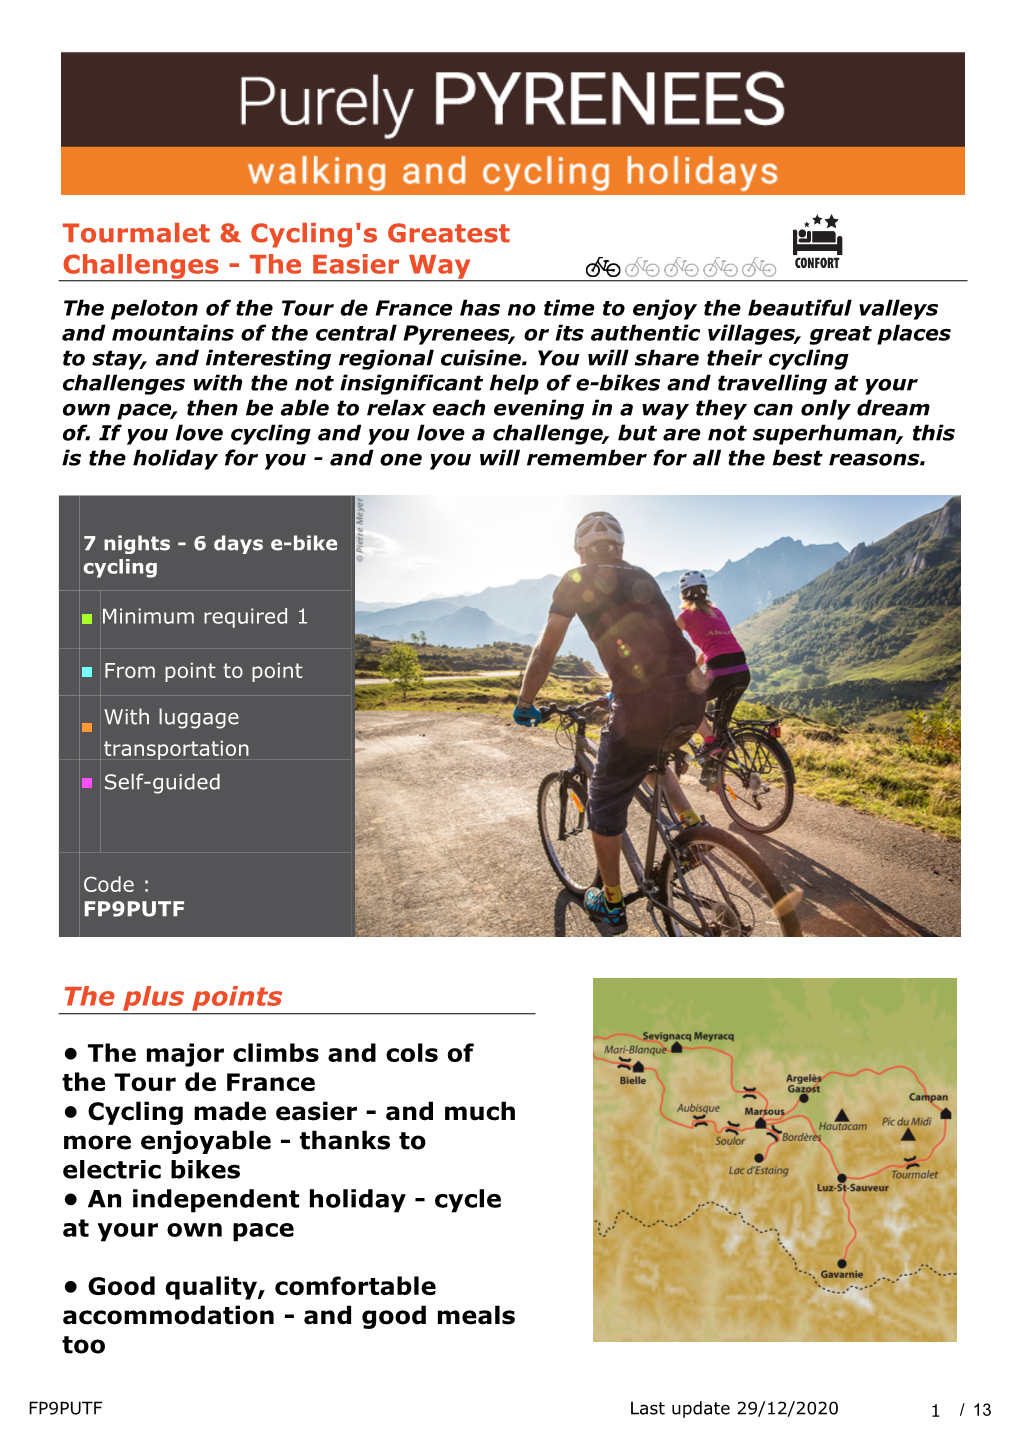 Tourmalet & Cycling's Greatest Challenges